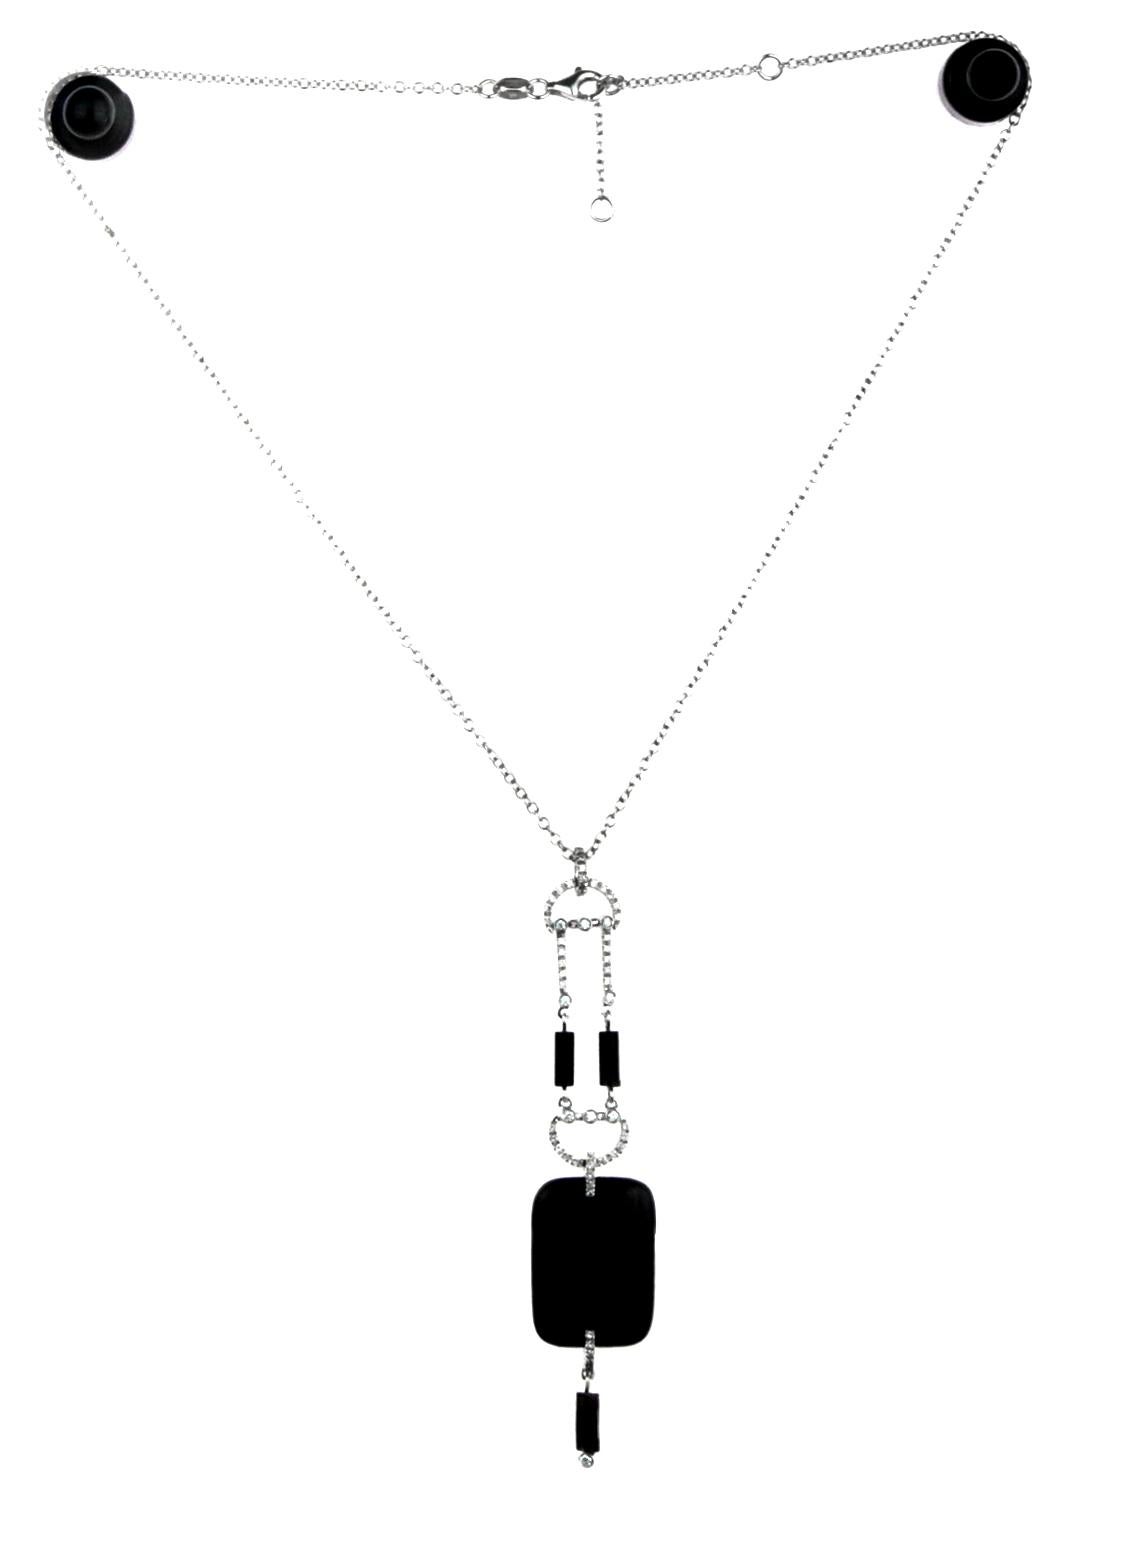 Bead Onyx and Diamond Drop Necklace/Chain with Pendant in 18K White Gold Hallmarked For Sale